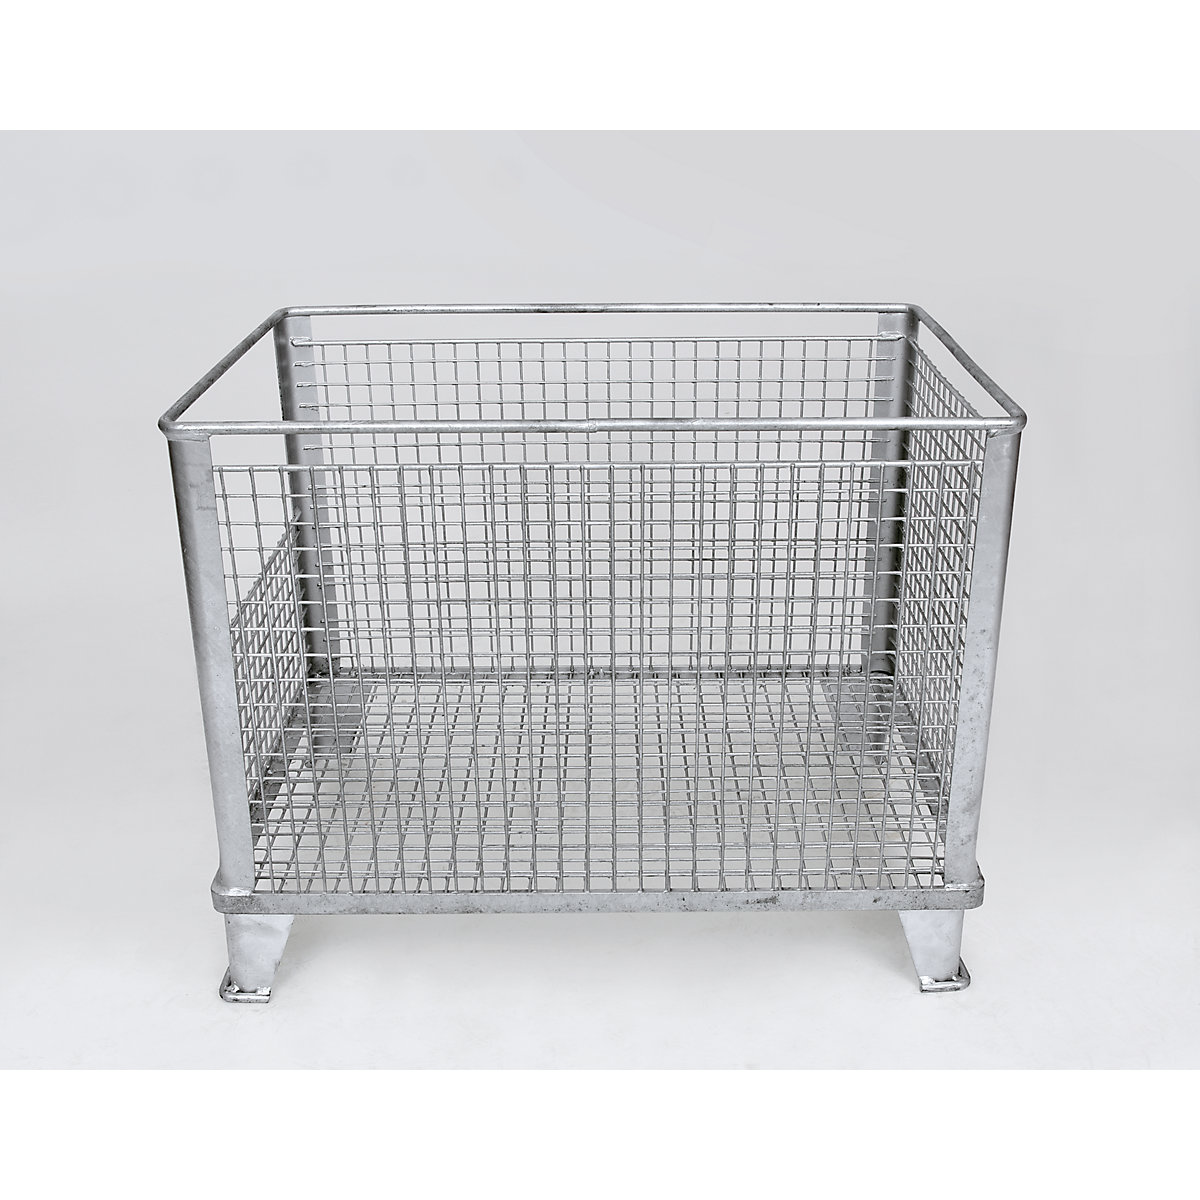 Stacking basket for heavy items, with access opening, external dims. LxWxH 815 x 565 x 625 mm-6